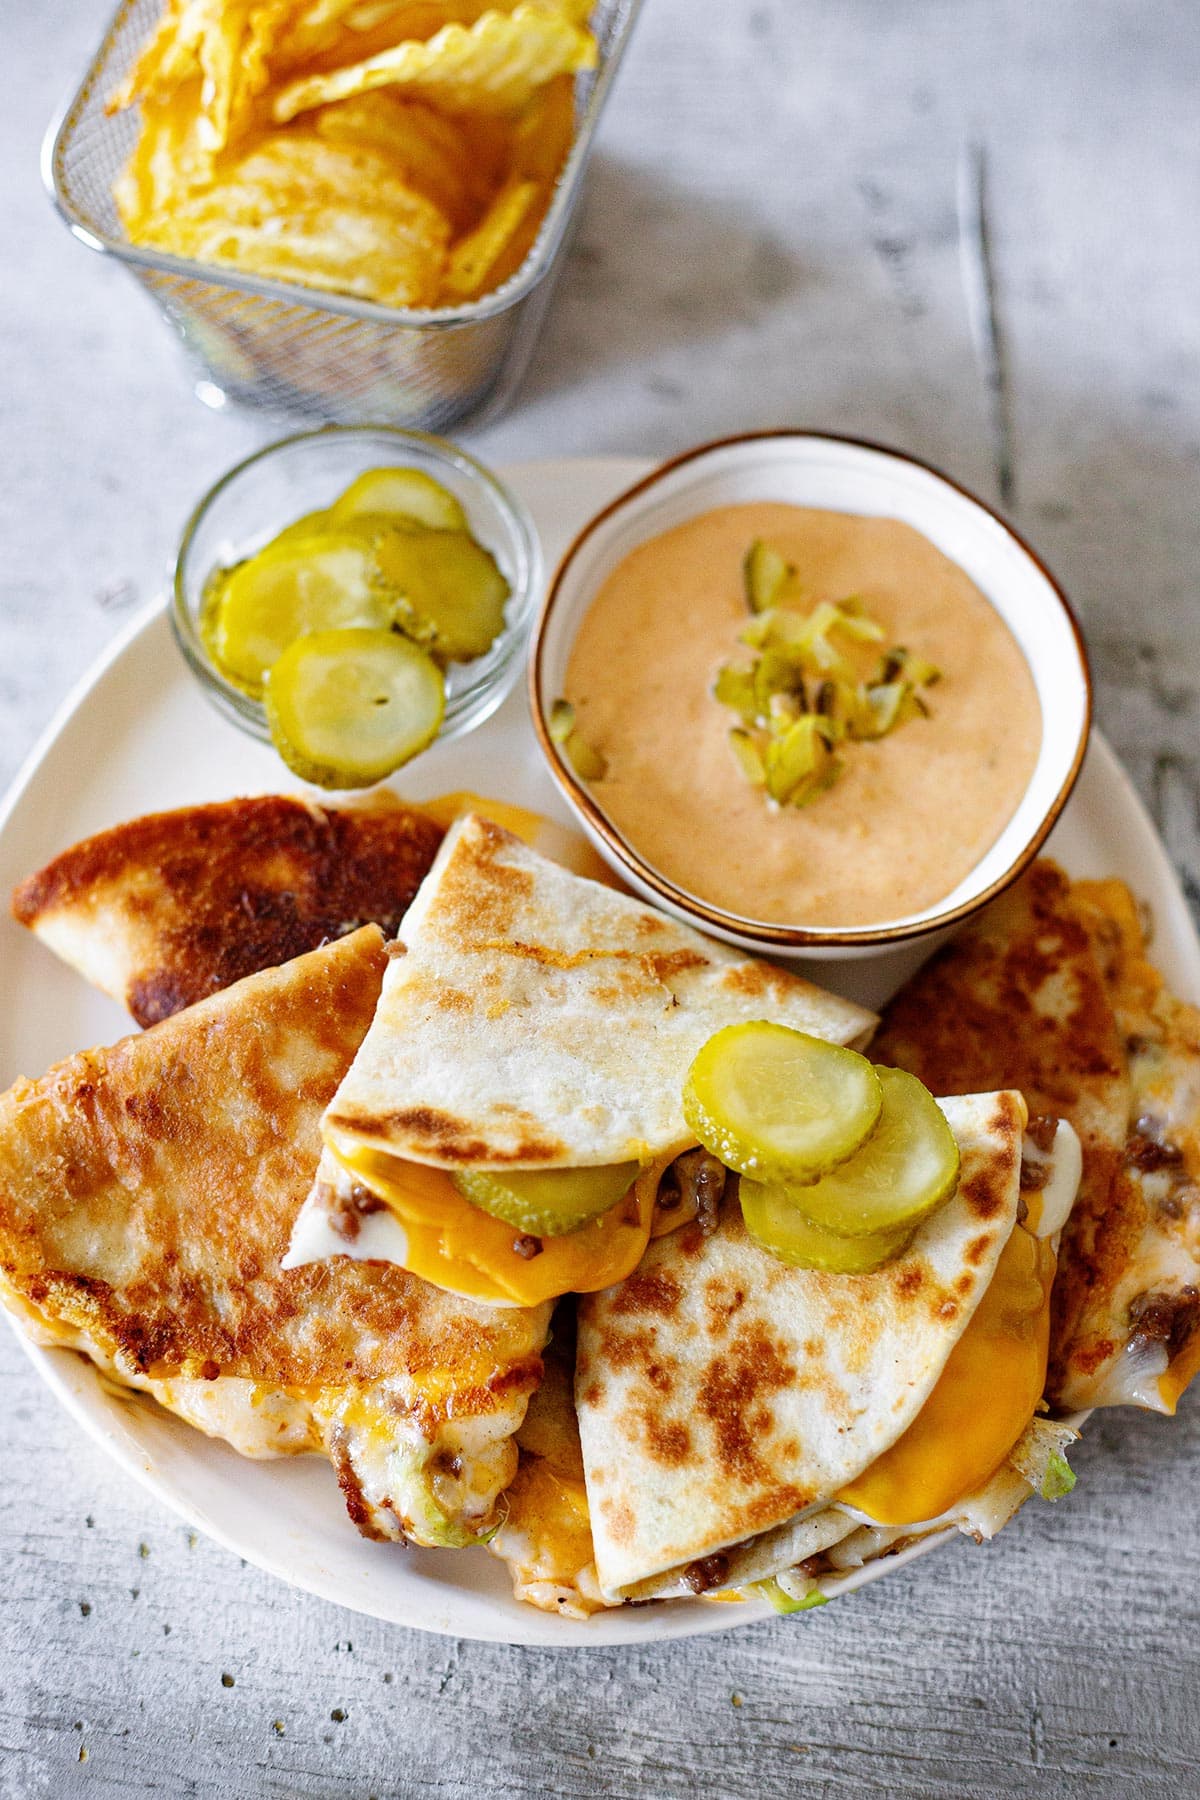 Big Mac quesadillas on a plate with a side of special sauce, pickles, and chips.